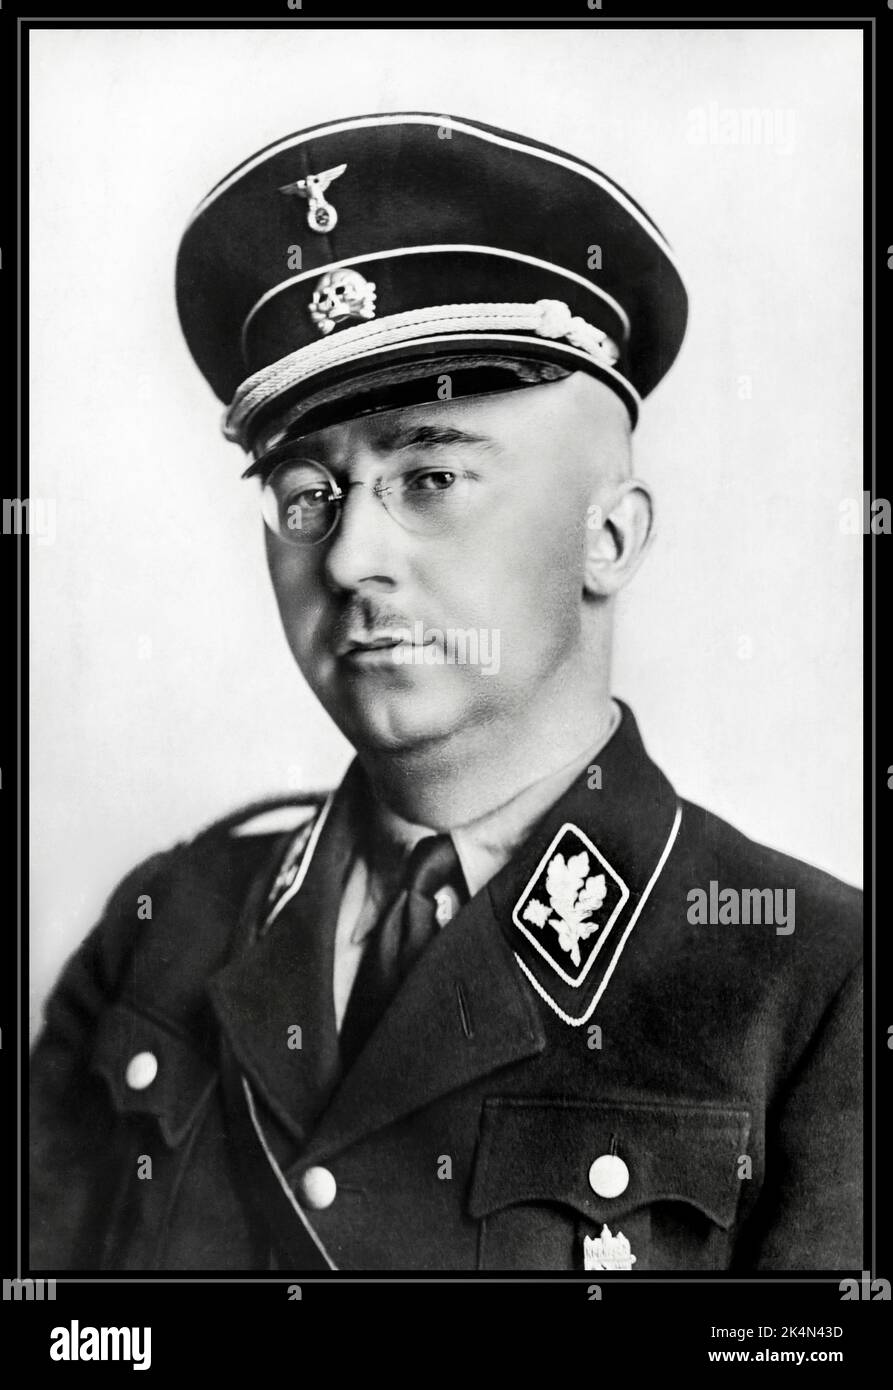 HIMMLER official portrait in SS uniform. 1938 Heinrich Luitpold Himmler was Reichsführer of the Schutzstaffel, and a leading member of the Nazi Party of Germany. Himmler was one of the most powerful men in Nazi Germany and a main architect of the Holocaust.1940's WW2 Heinrich  German National Socialist Politician Nazi military commander secret police. Facilitated genocide across Europe and the east. Committed suicide in 1945 Stock Photo